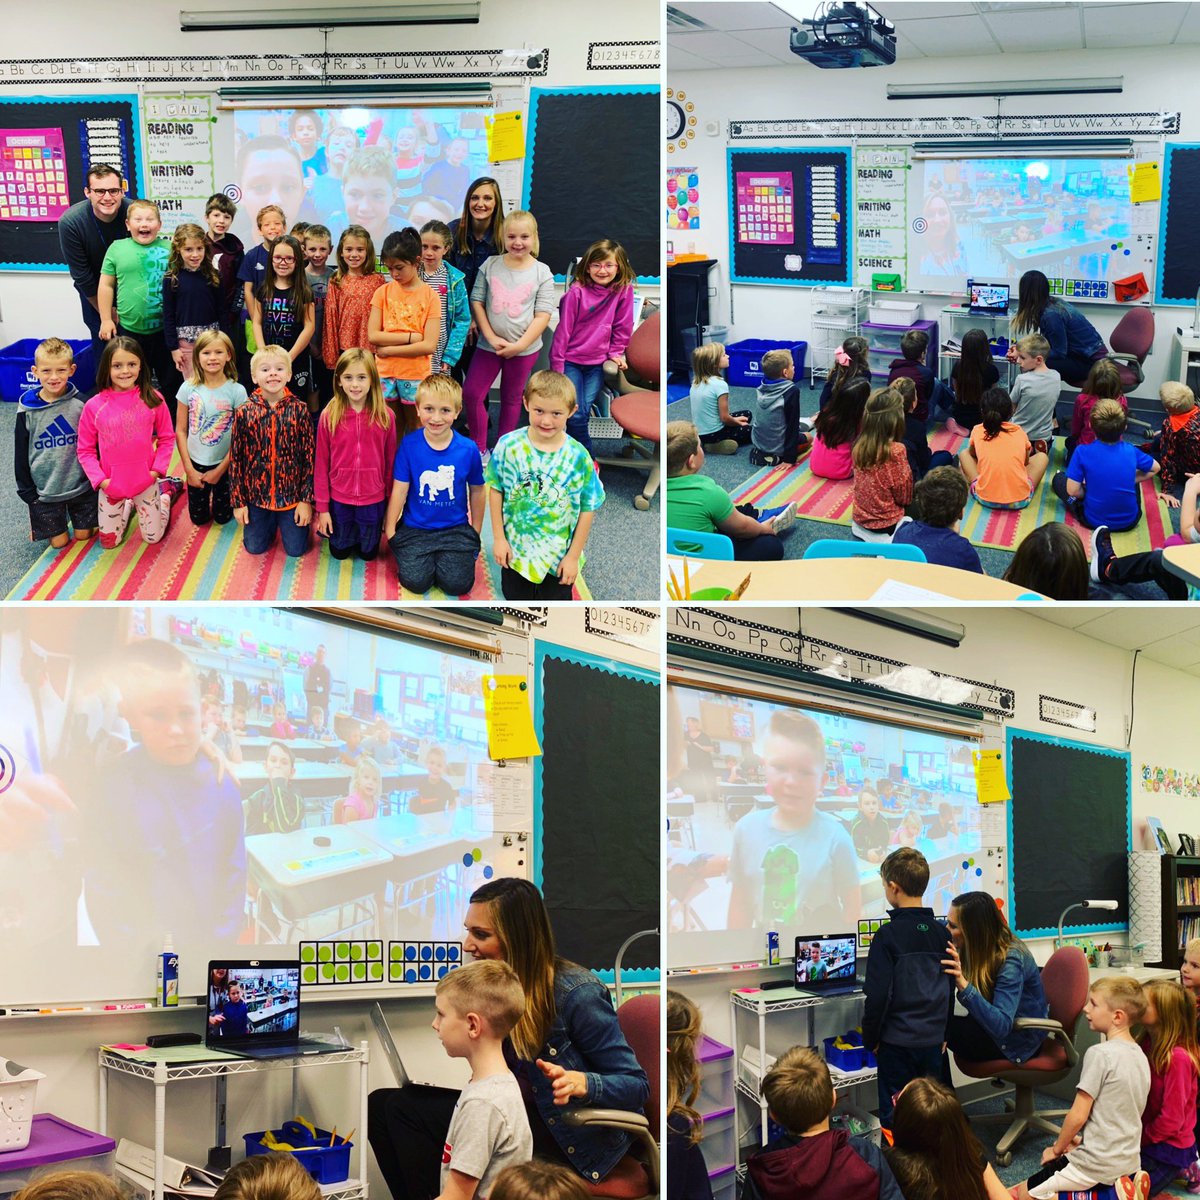 It was such a special @skypeclassroom  connection for @meganwarwick12 & her 2nd graders at @vanmeterschools as they connected with their pen pals from Mrs. Fisher’s 2nd graders at @HighlandLSC in New York. 

Thank you @mdrez07 and @edtechLSC 😊

#vanmeter